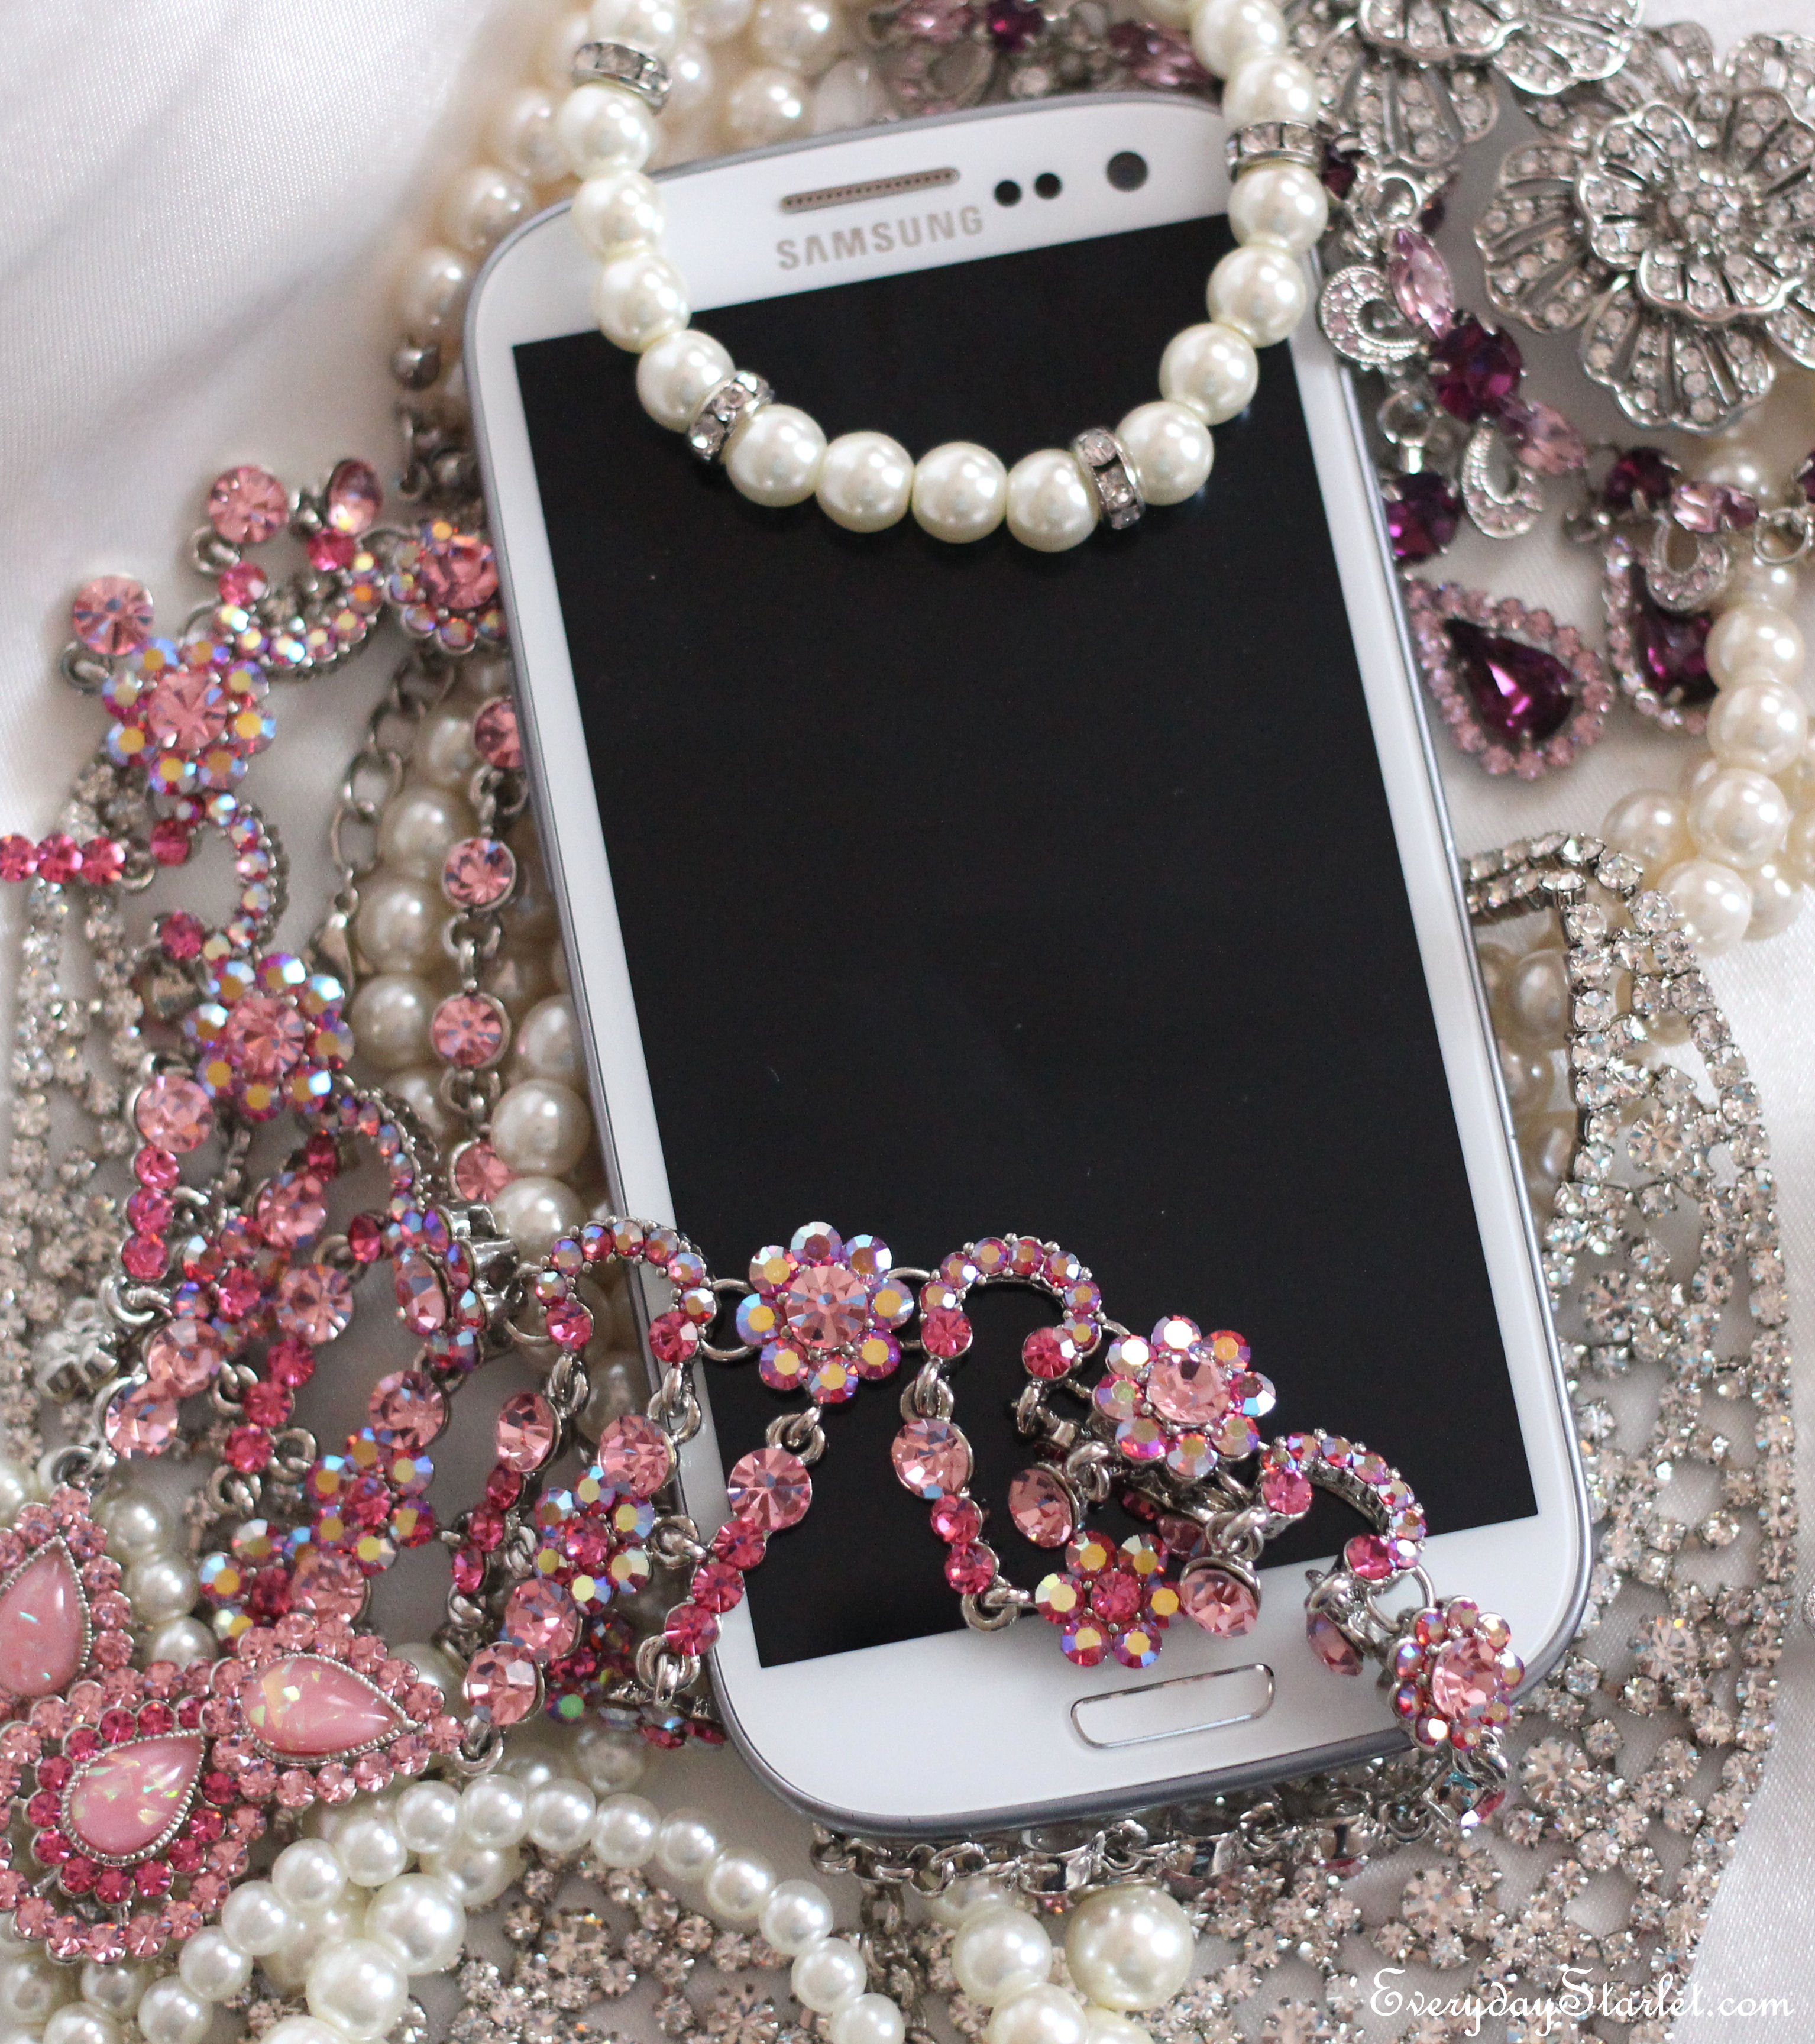 Top 5 SmartPhone Apps for Glamour Girls